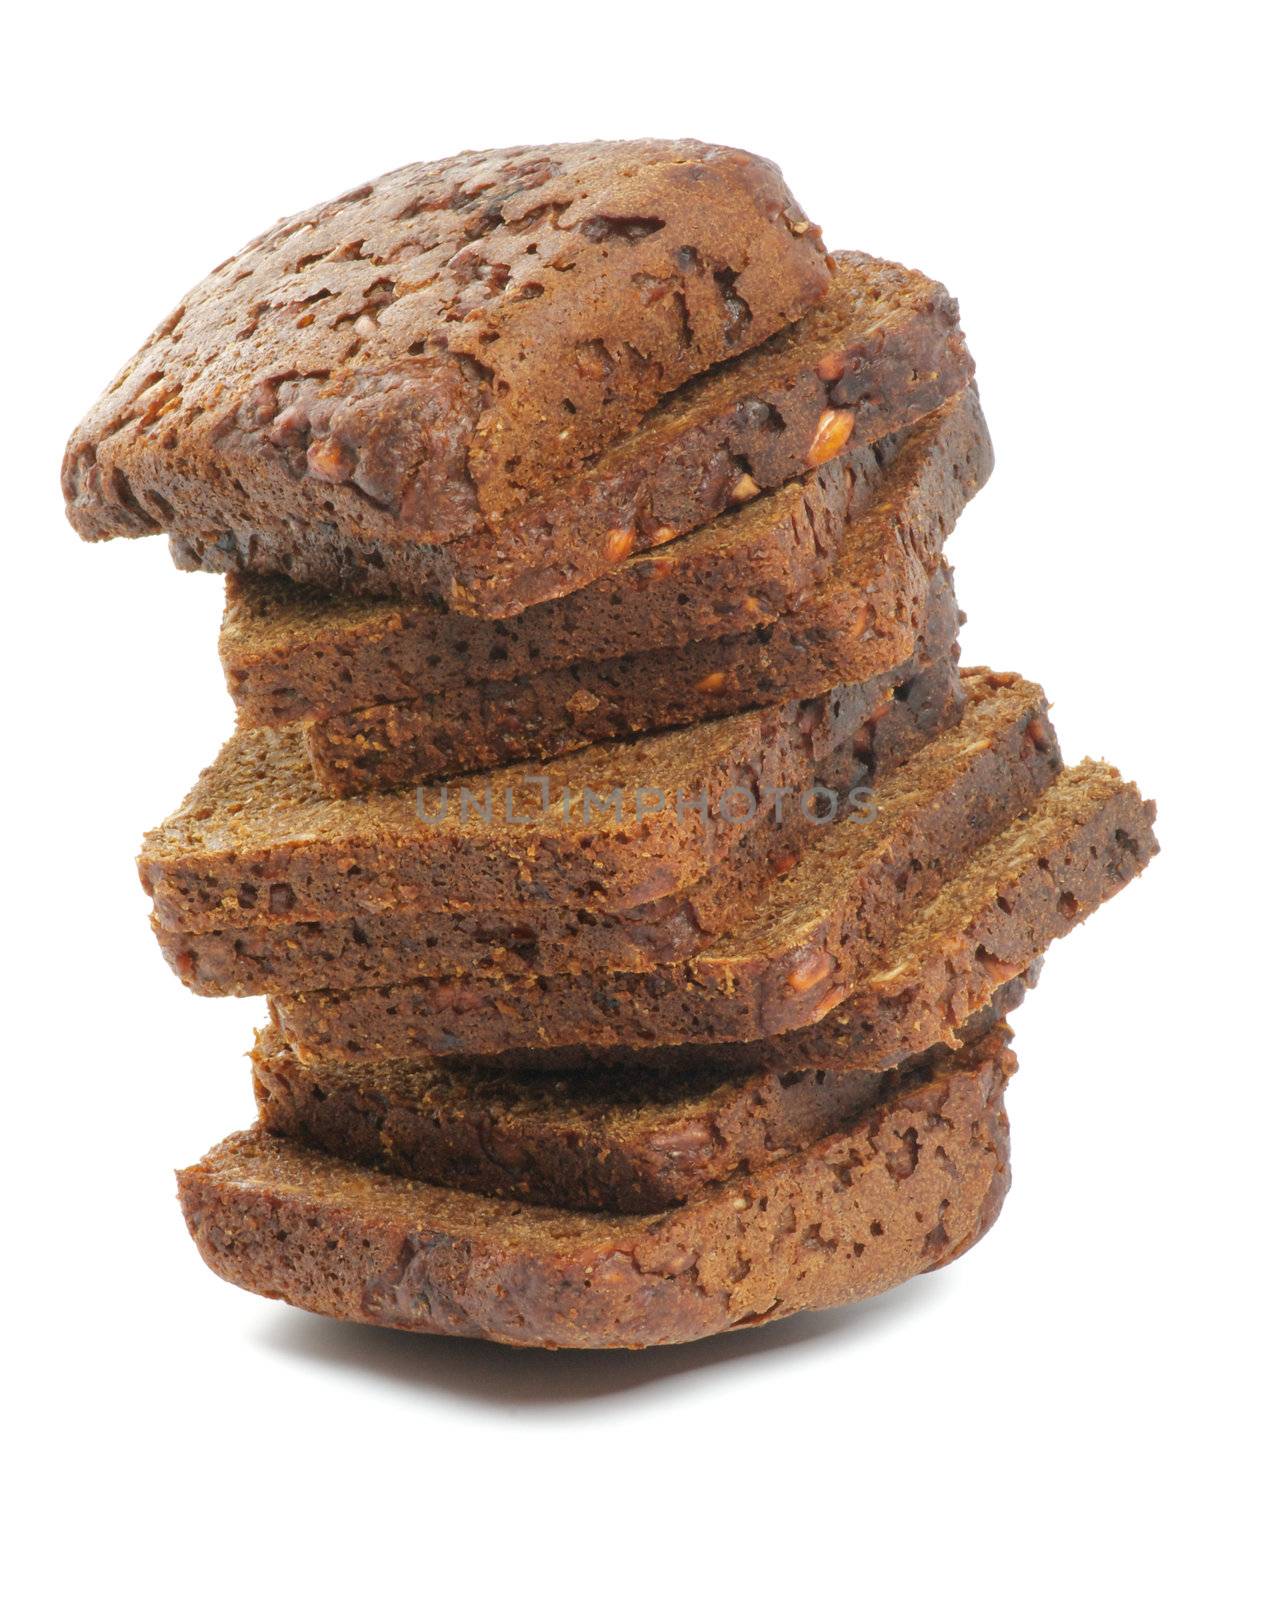 Stack of Brown bread Slices by zhekos